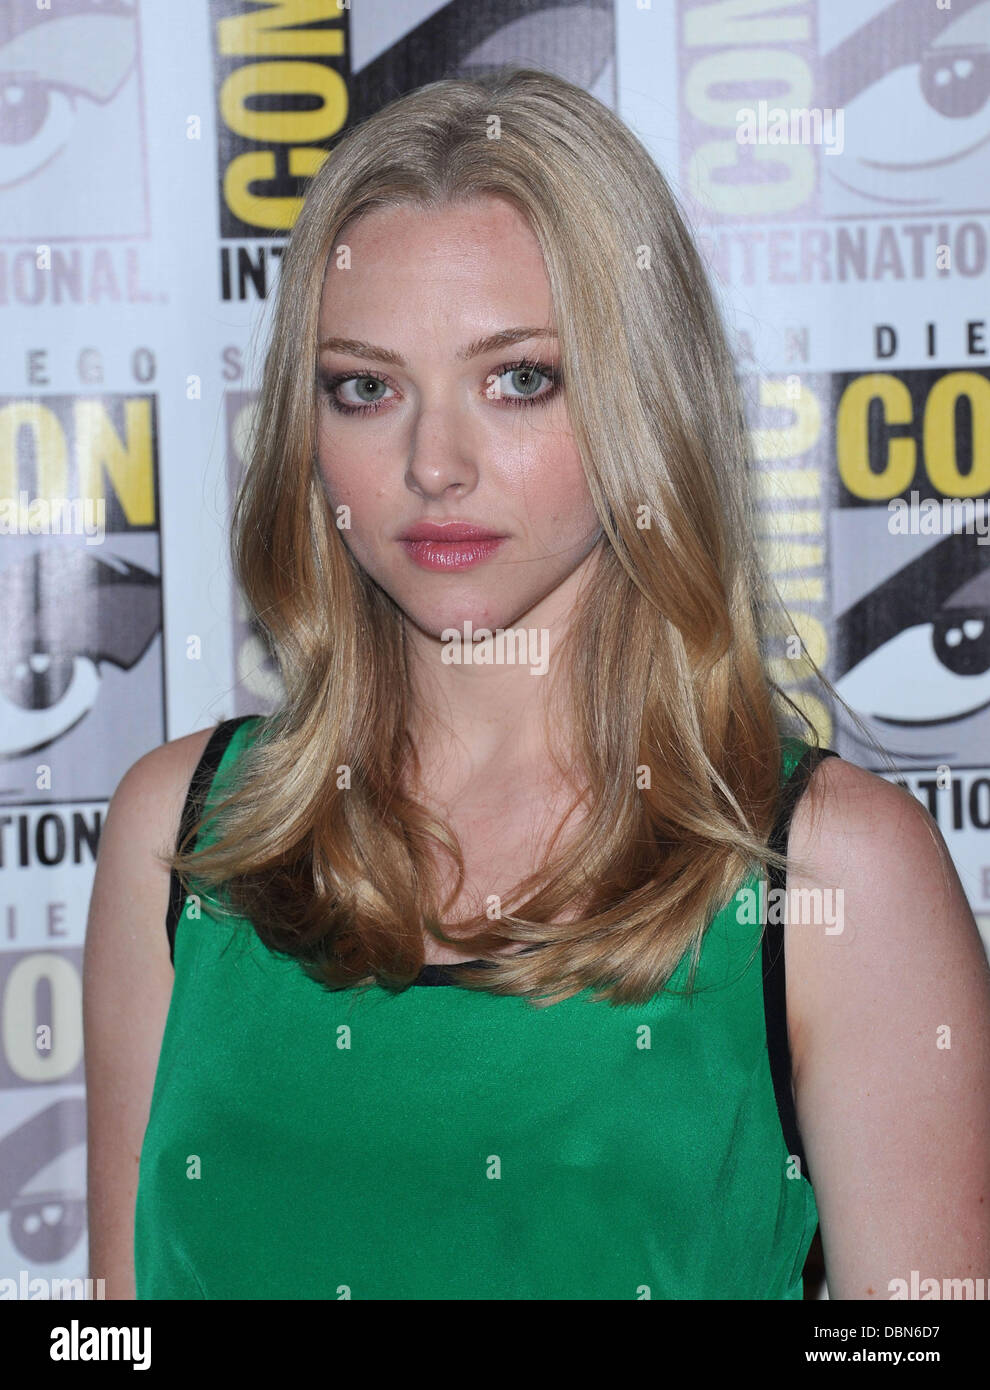 Amanda Seyfried 2011 Comic-Con Convention - Day 1 - 'In Time' press conference at the Hilton Bayfront - Arrivals San Diego, California - 21.07.11 Stock Photo